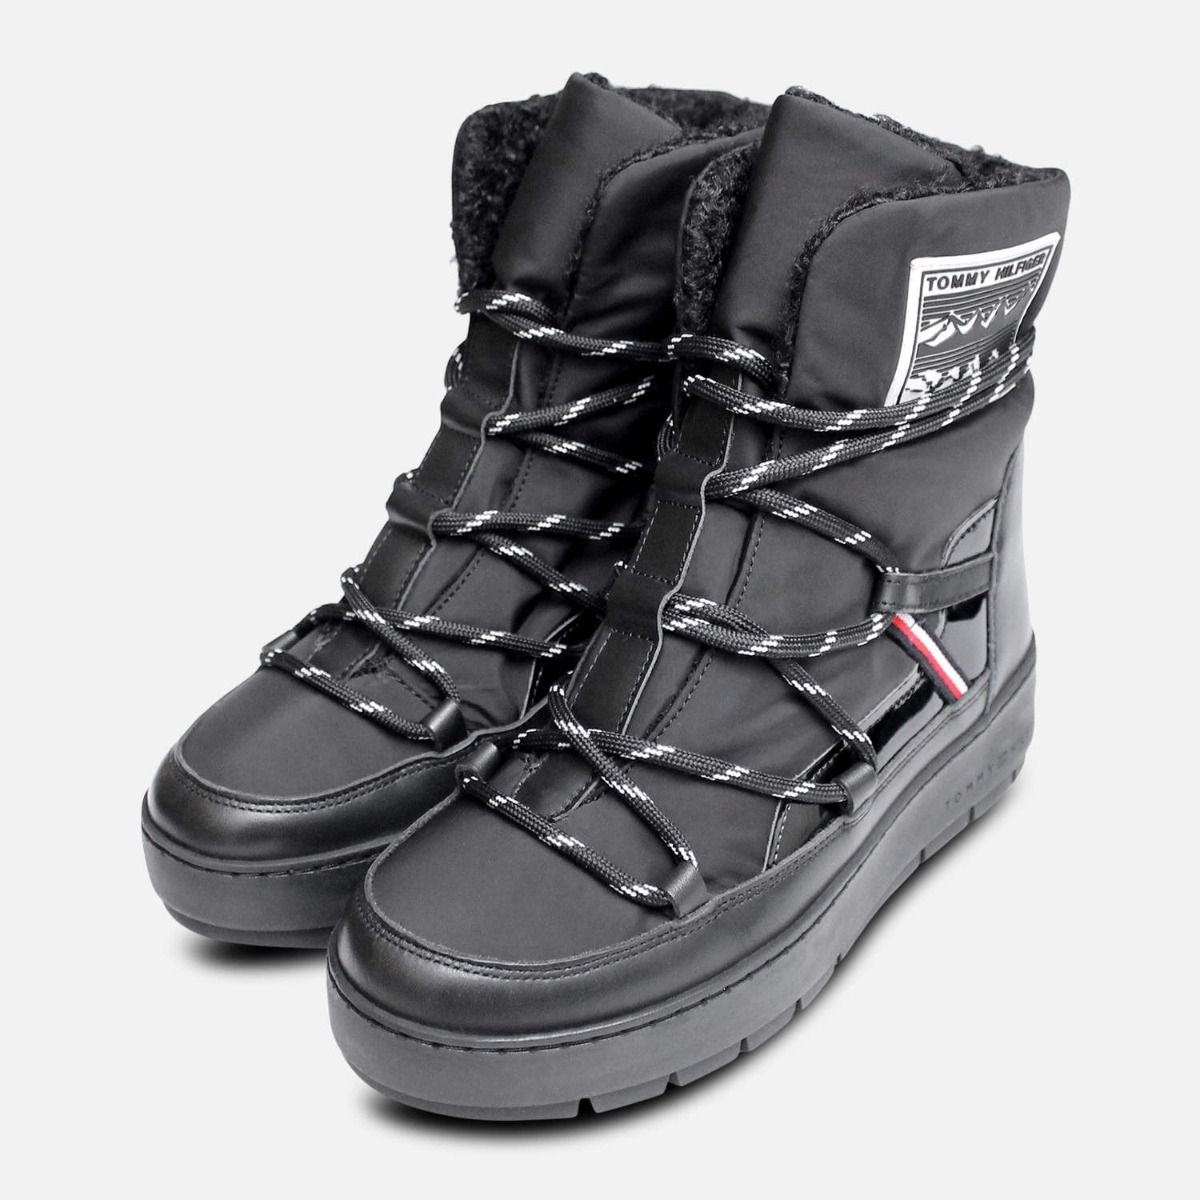 Designer Snow Boots in Black by Tommy 